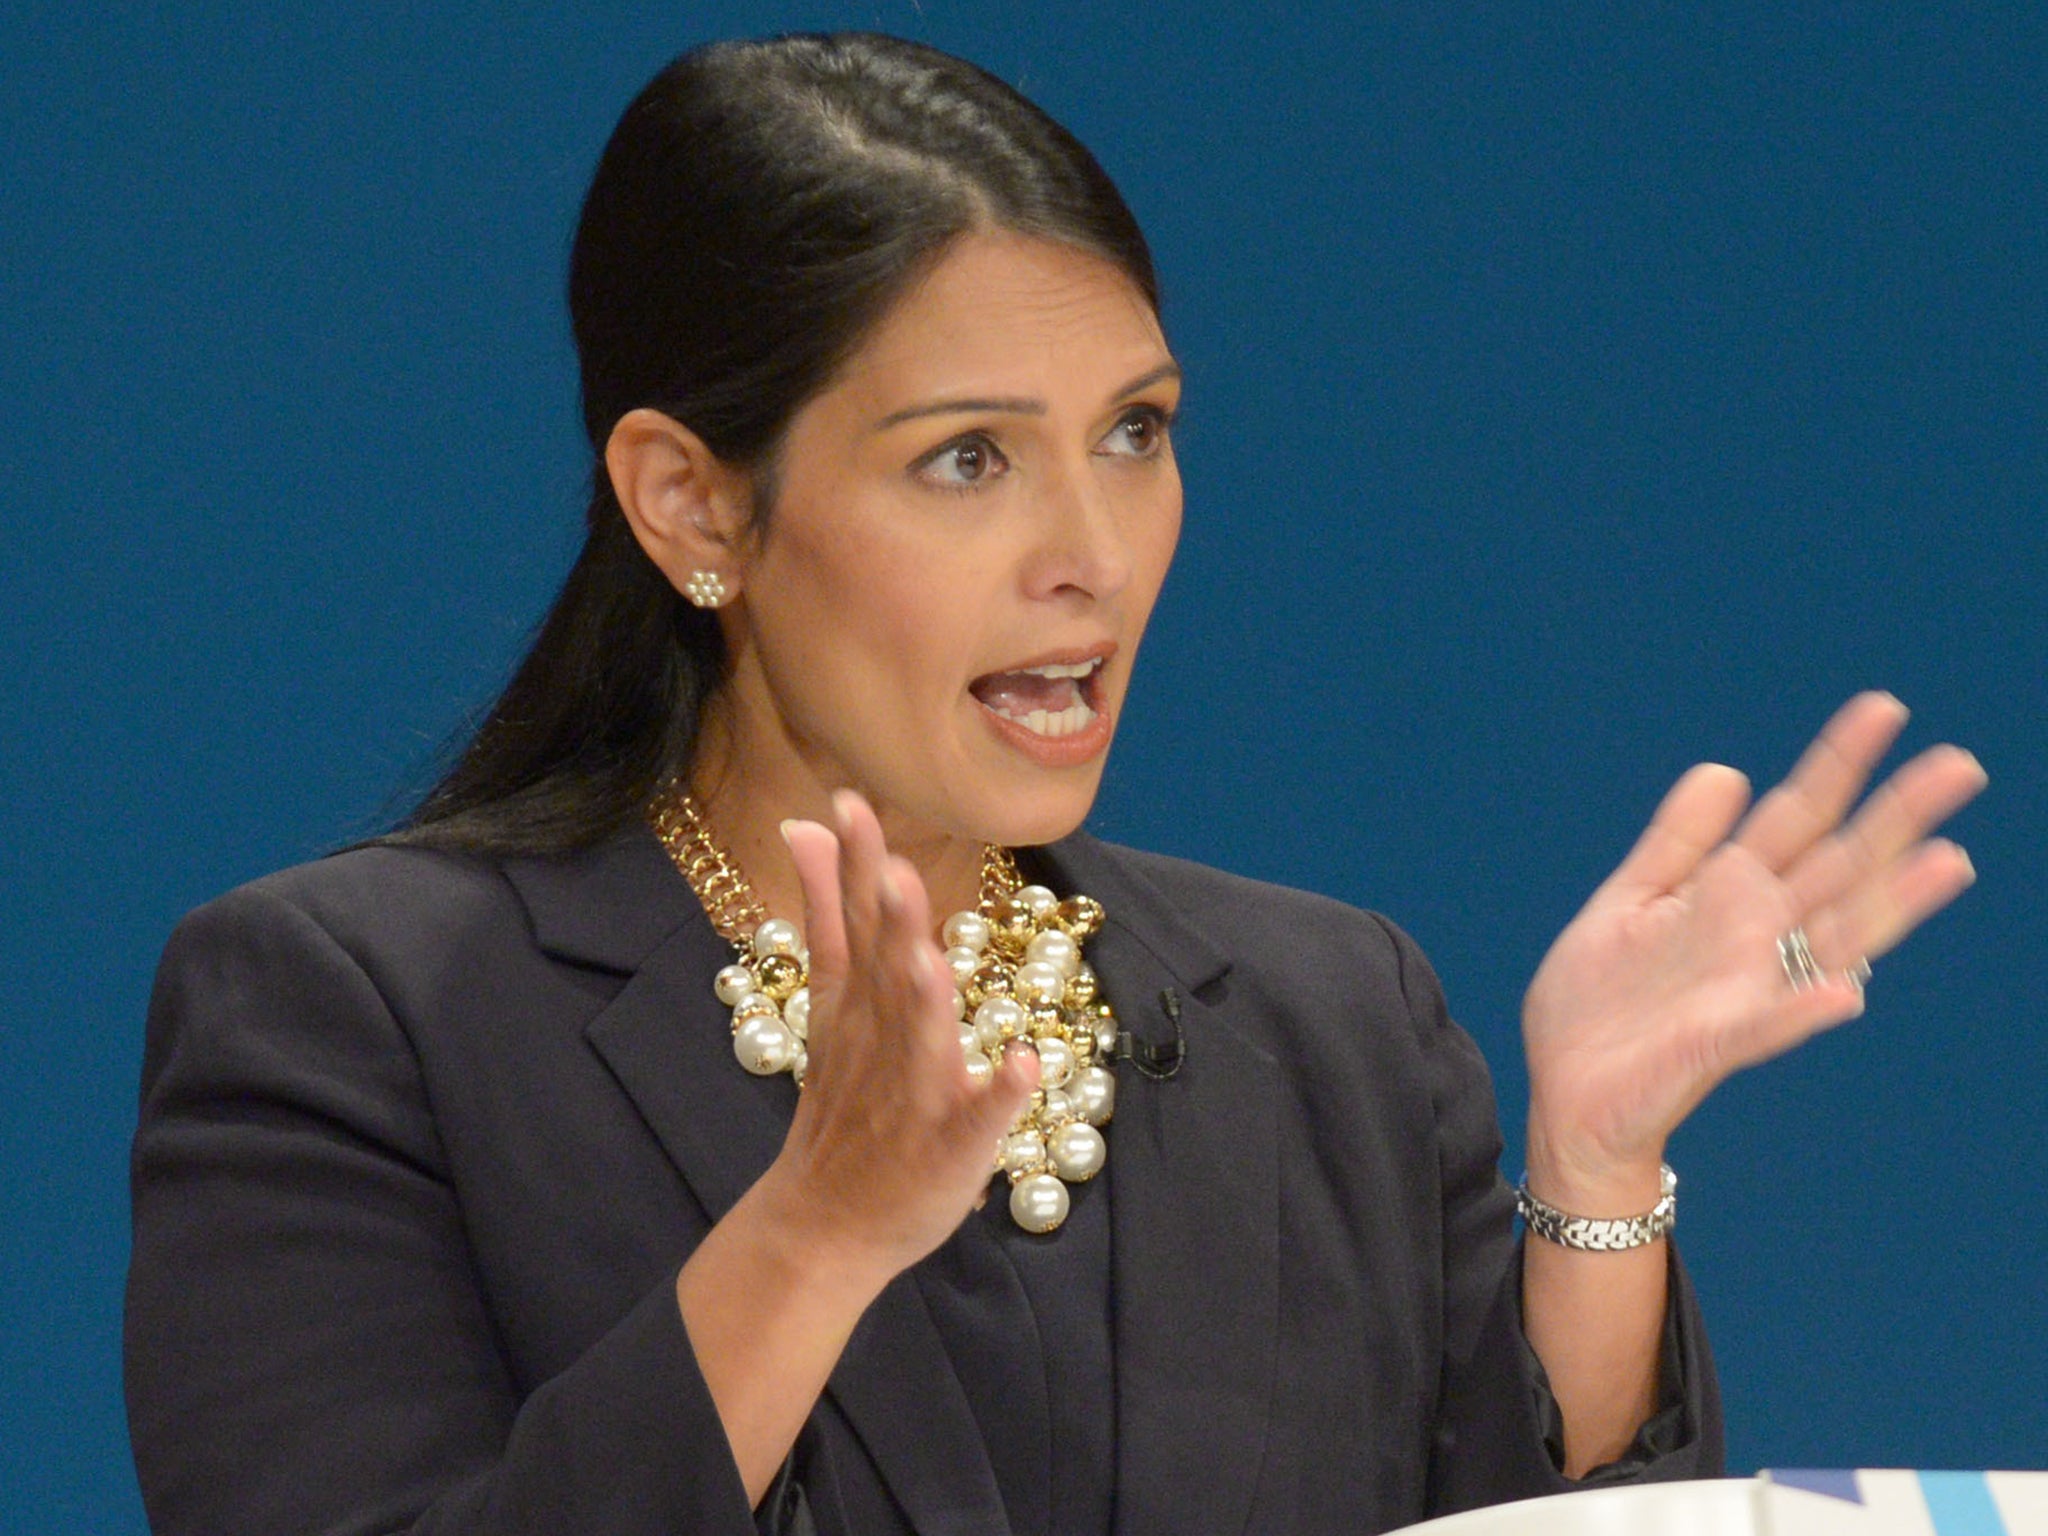 International Development Secretary Priti Patel is opposed to cutting the 0.7 per cent foreign aid target